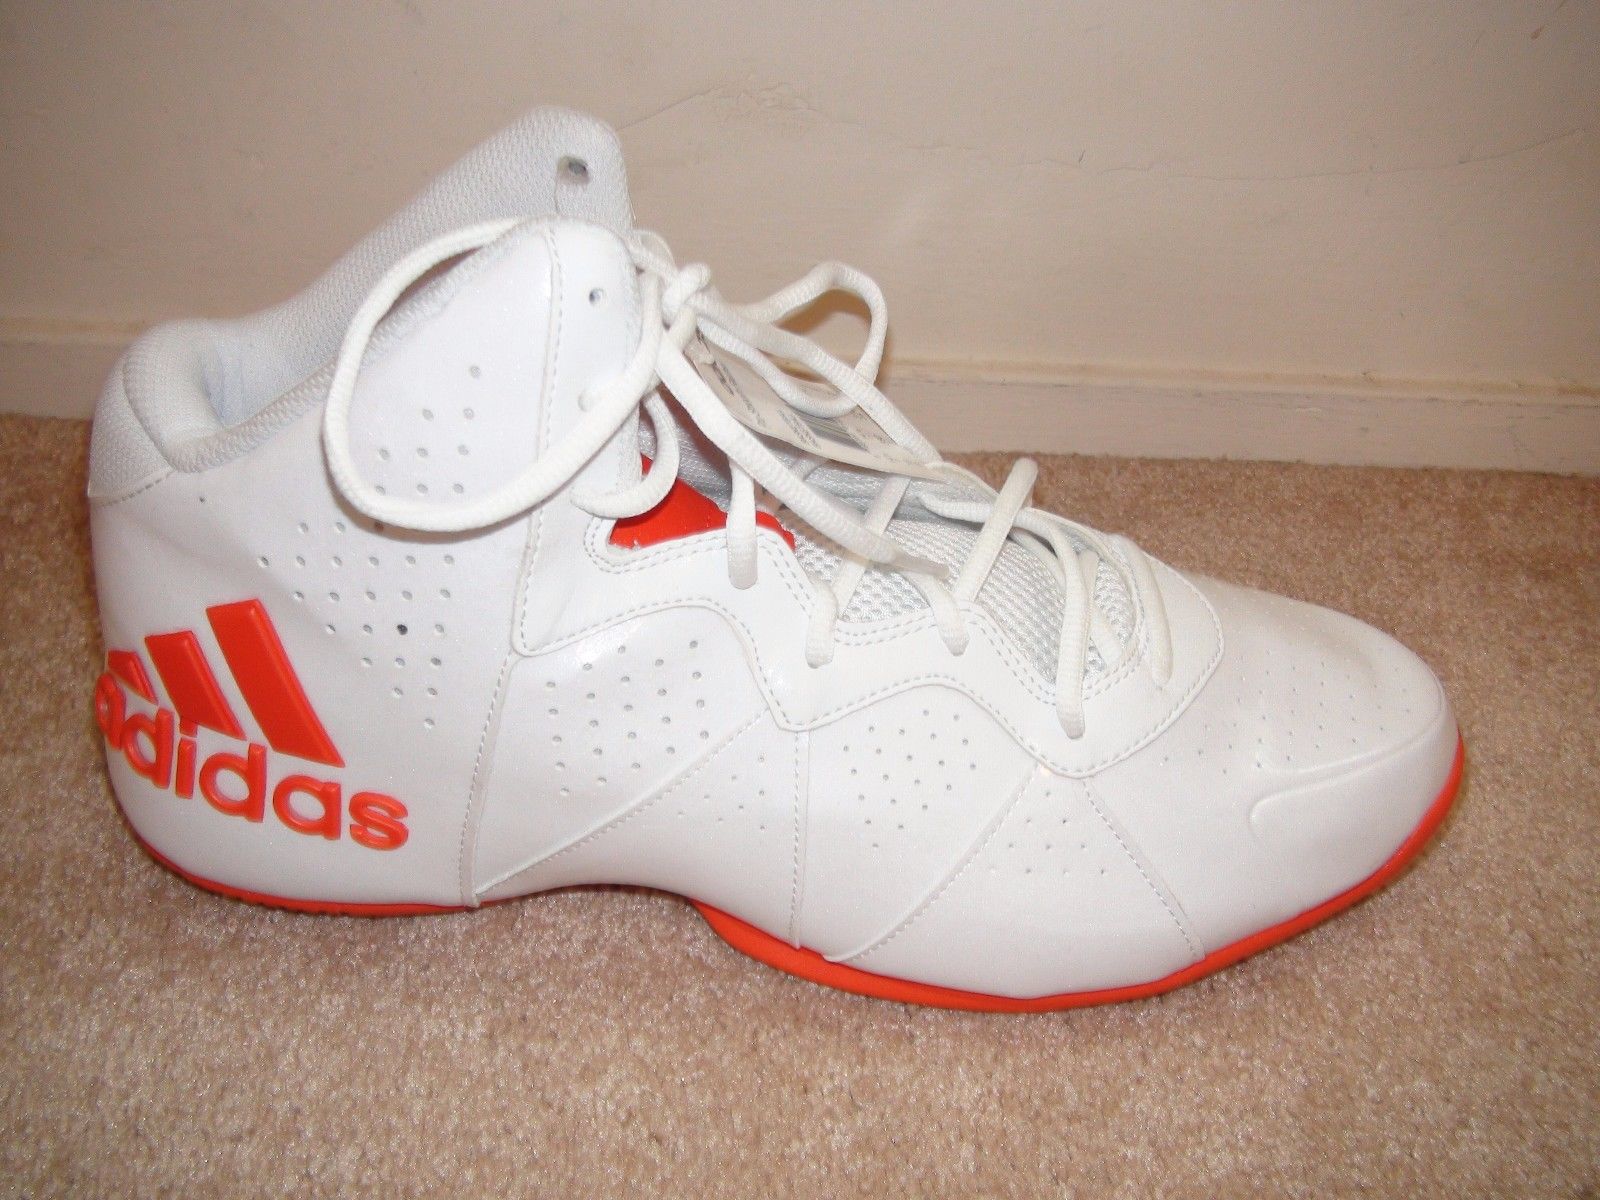 Mens shoes - adidas c77300 pro smooth feather mens basketball shoes ...